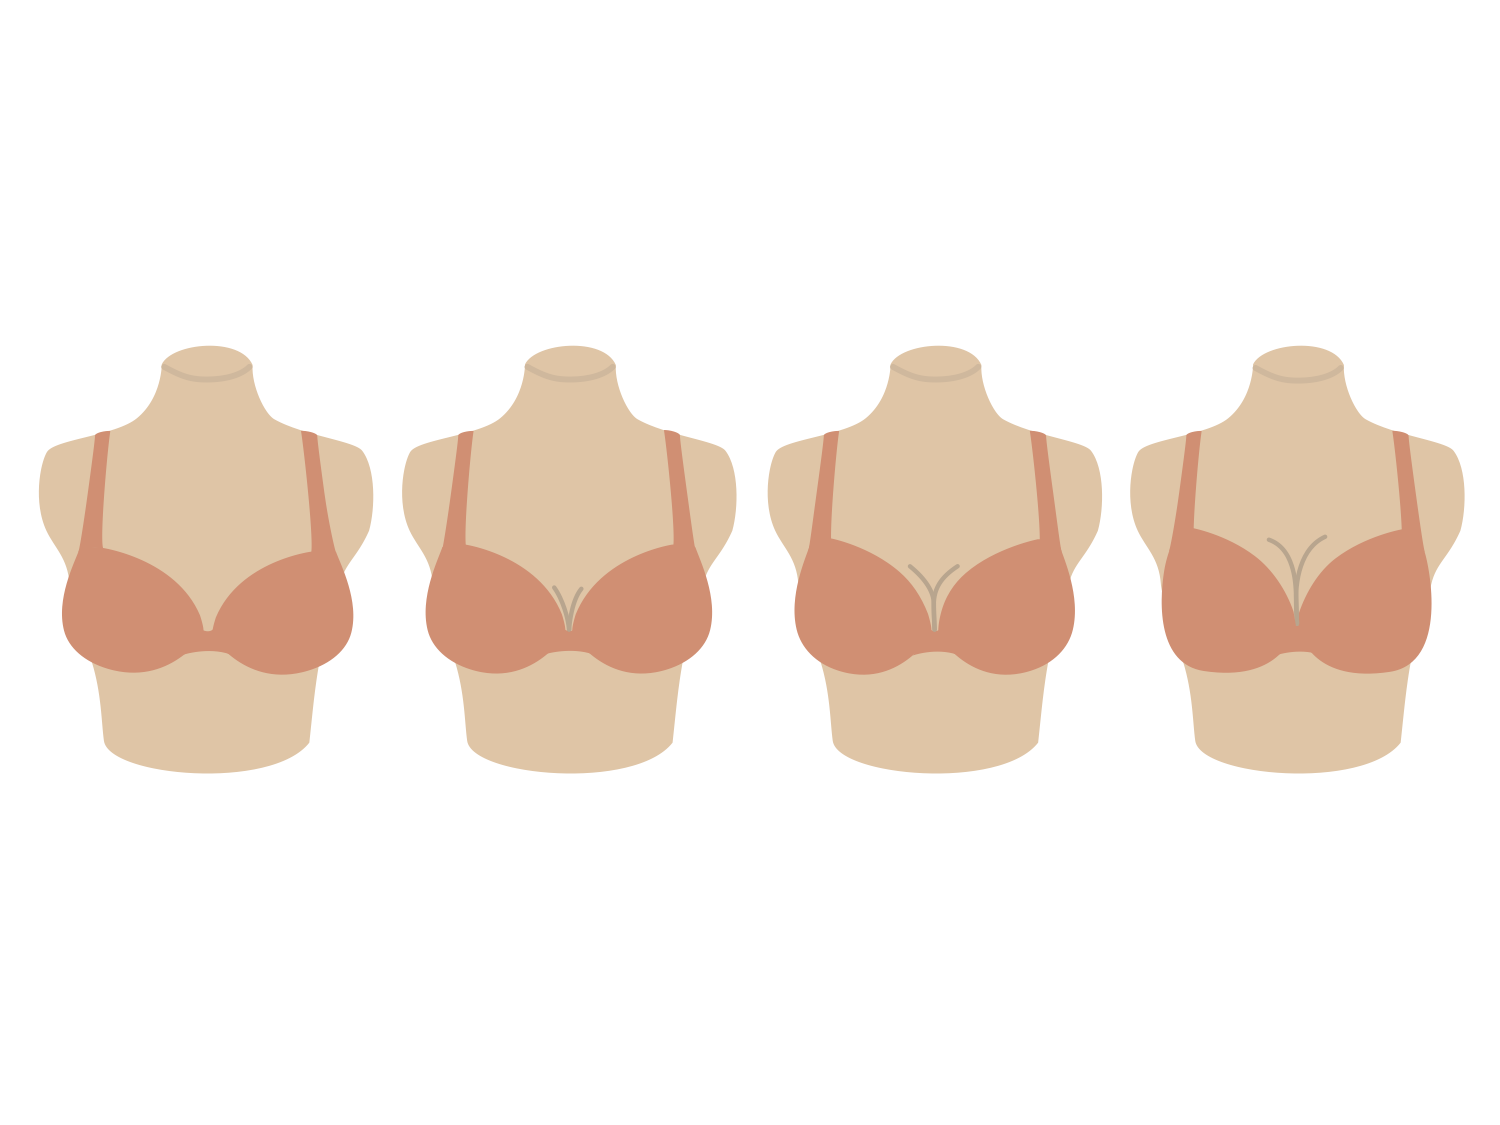 Getting to Know Bra Sister Sizes and Their Value  Bra size calculator, Bra  hacks, Bra size charts